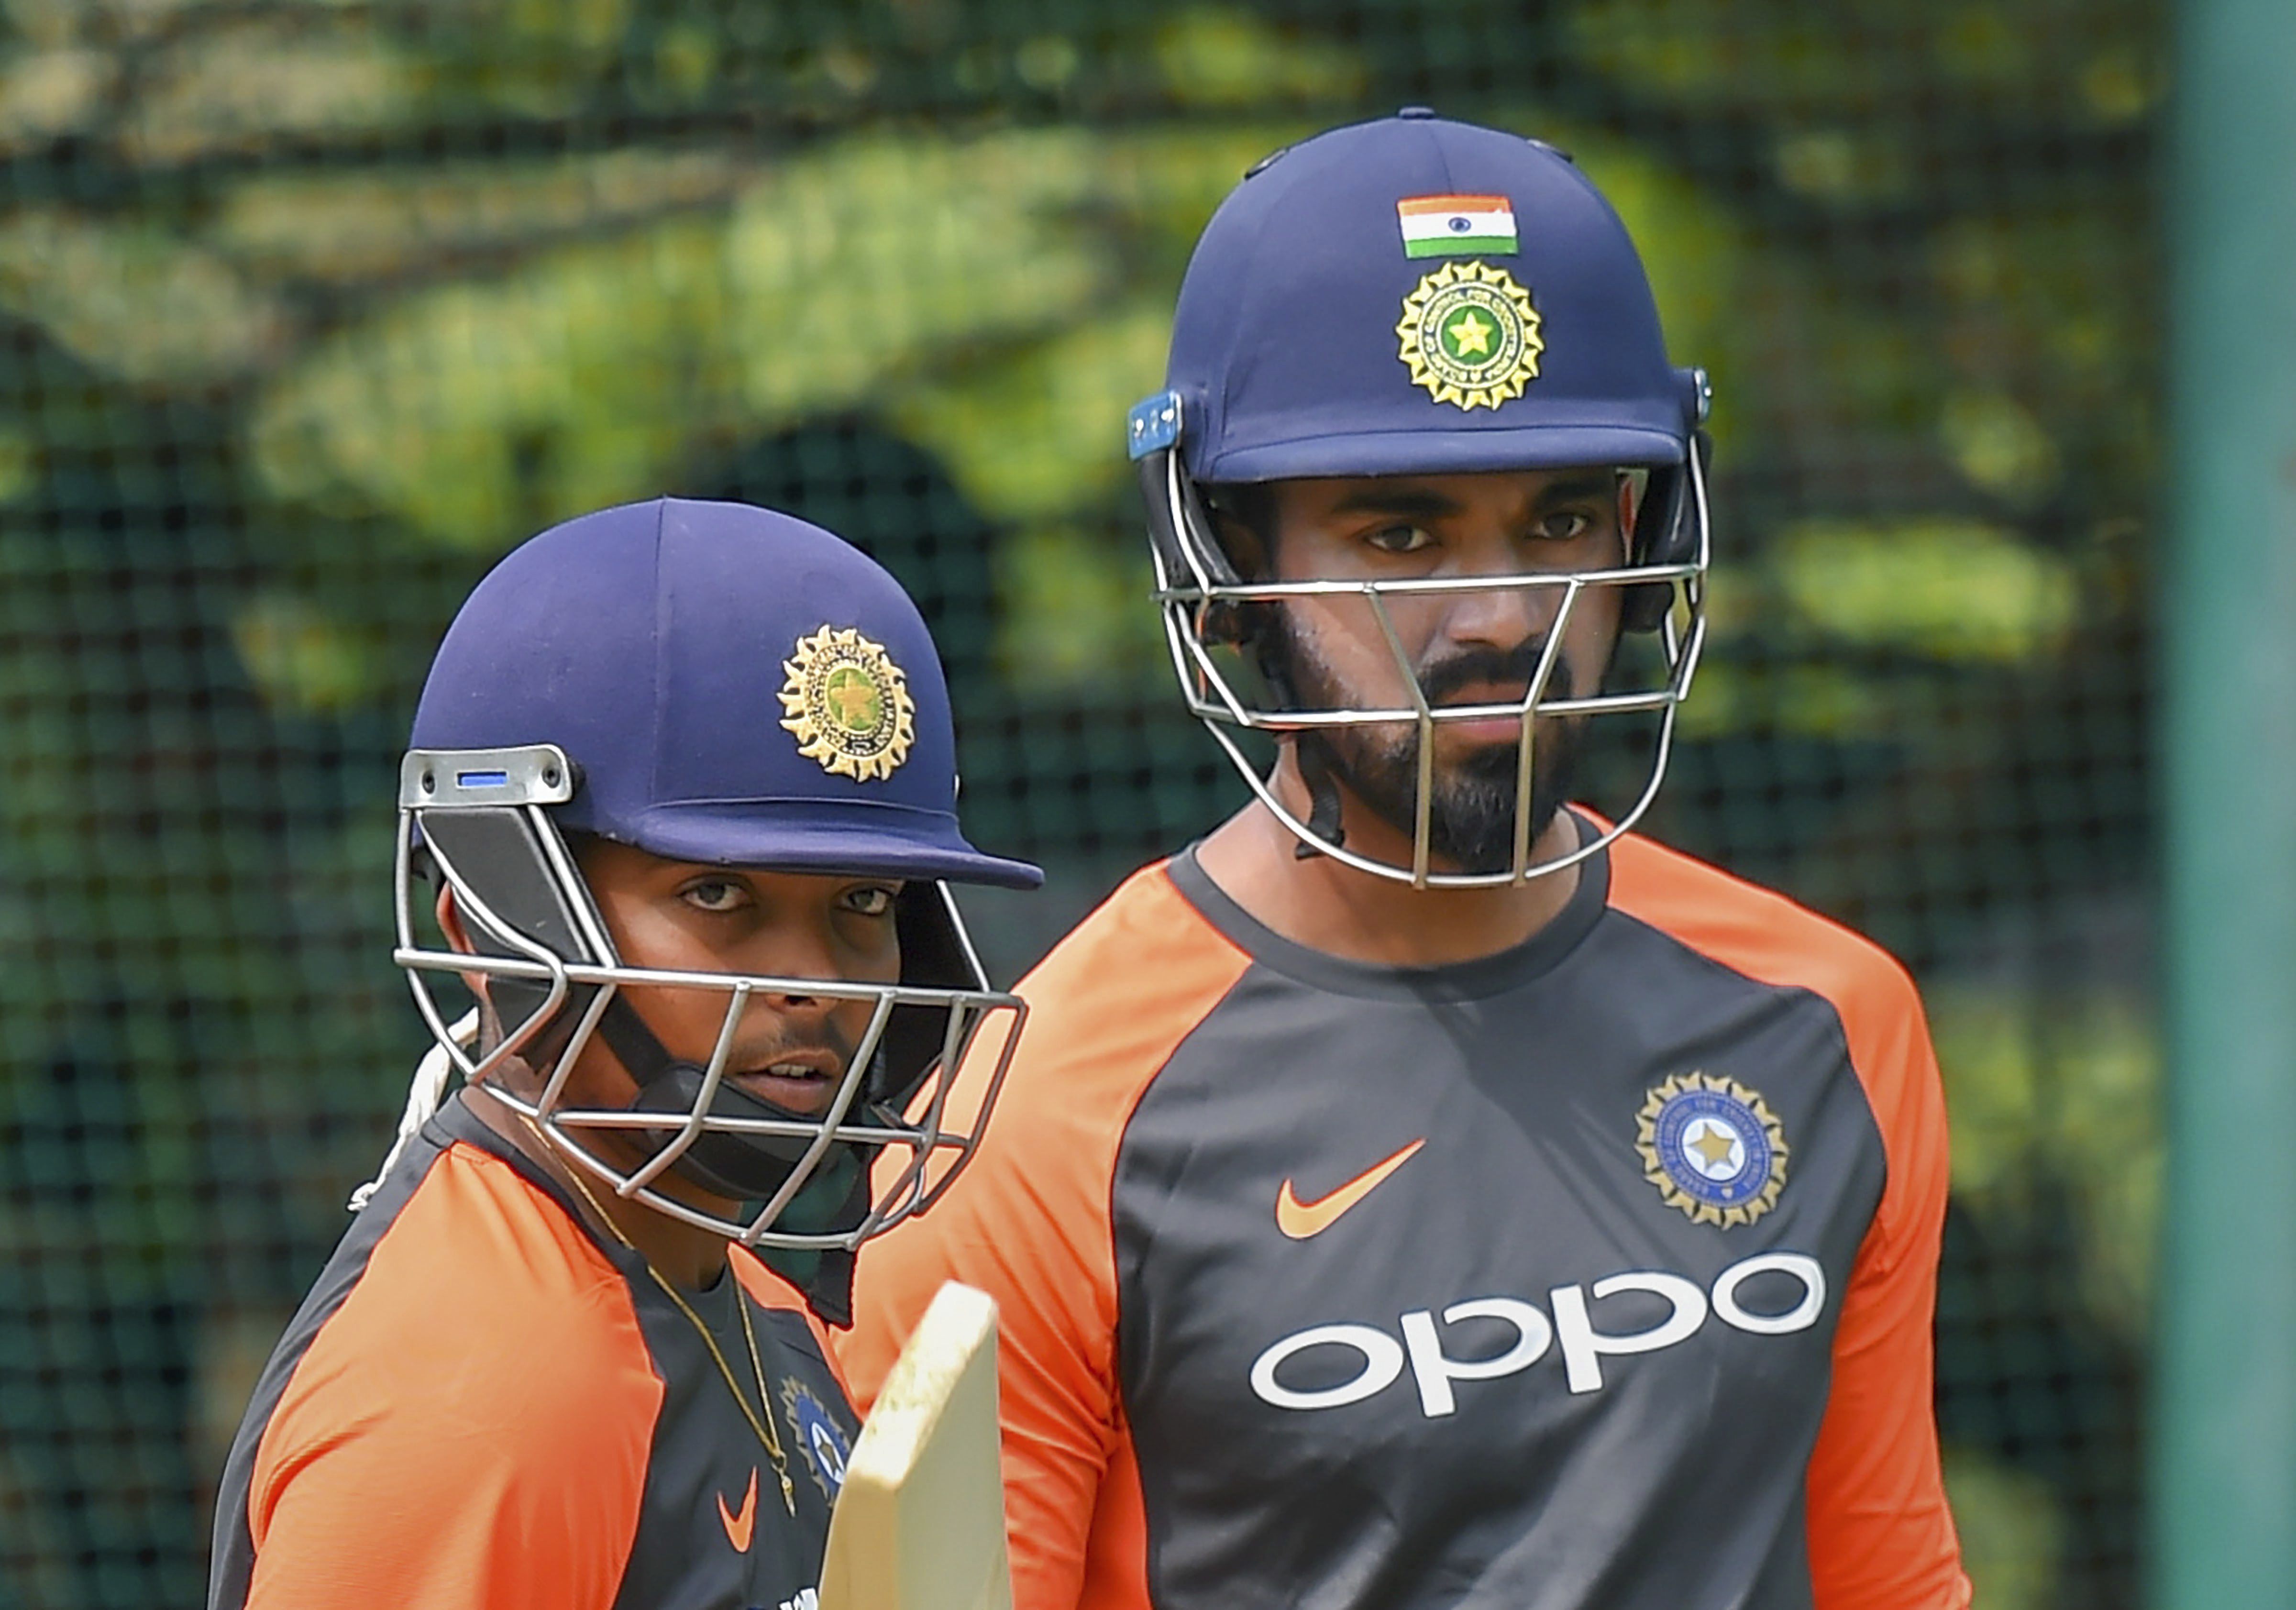 Indian cricketers Prithvi Shaw and Lokesh Rahul during a practice session ahead of India-West Indies second cricket test match, in Hyderabad - AP